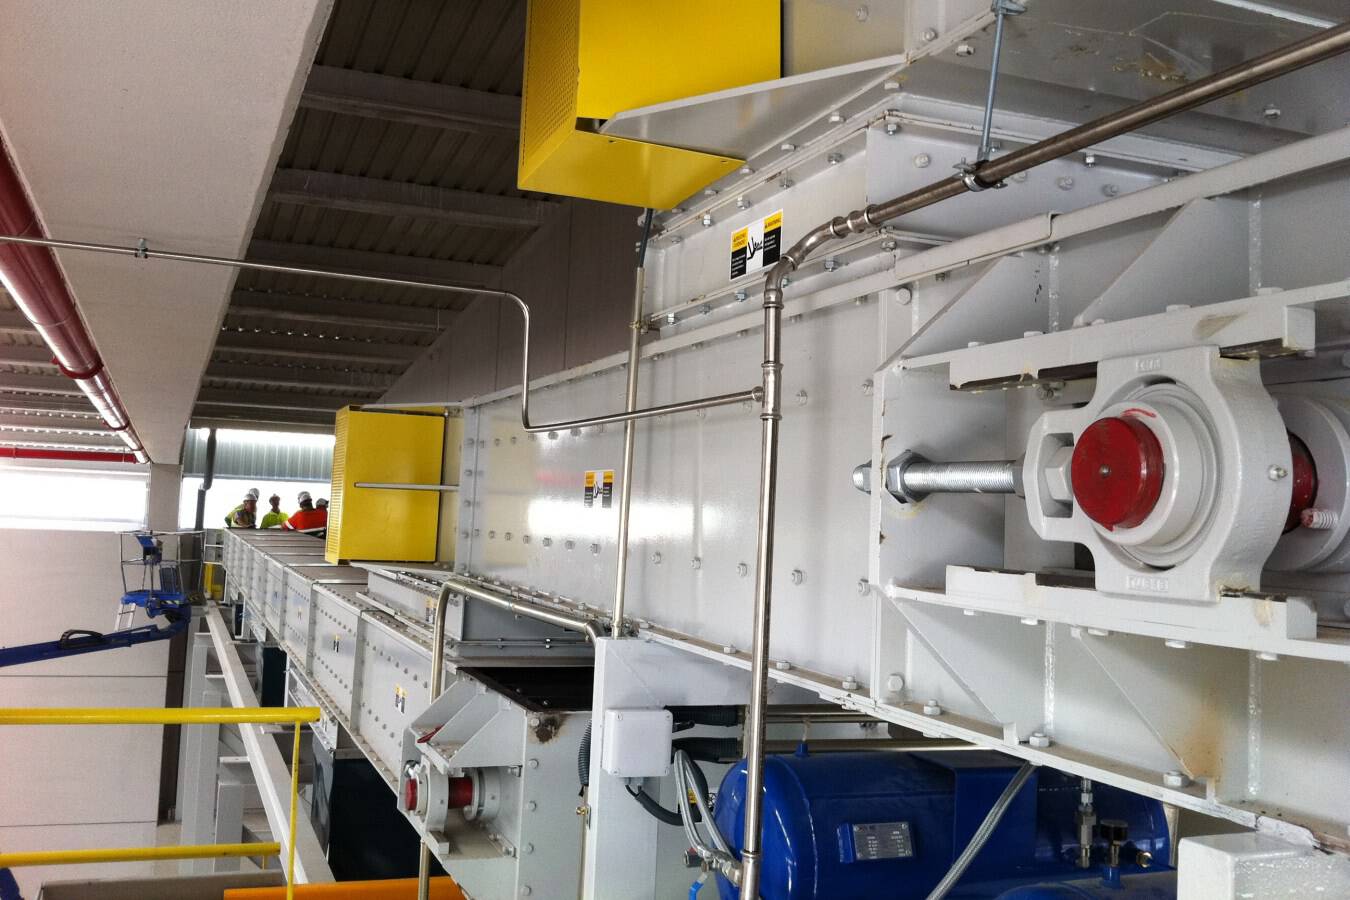 Chain conveyors for transport and elevation of Solid Recovered Fuel Sinfimasa designed three chain conveyors for the transport of SRF. Sectorization of two fire zones was important, so one of the conveyors was equipped with firewall slide gates.